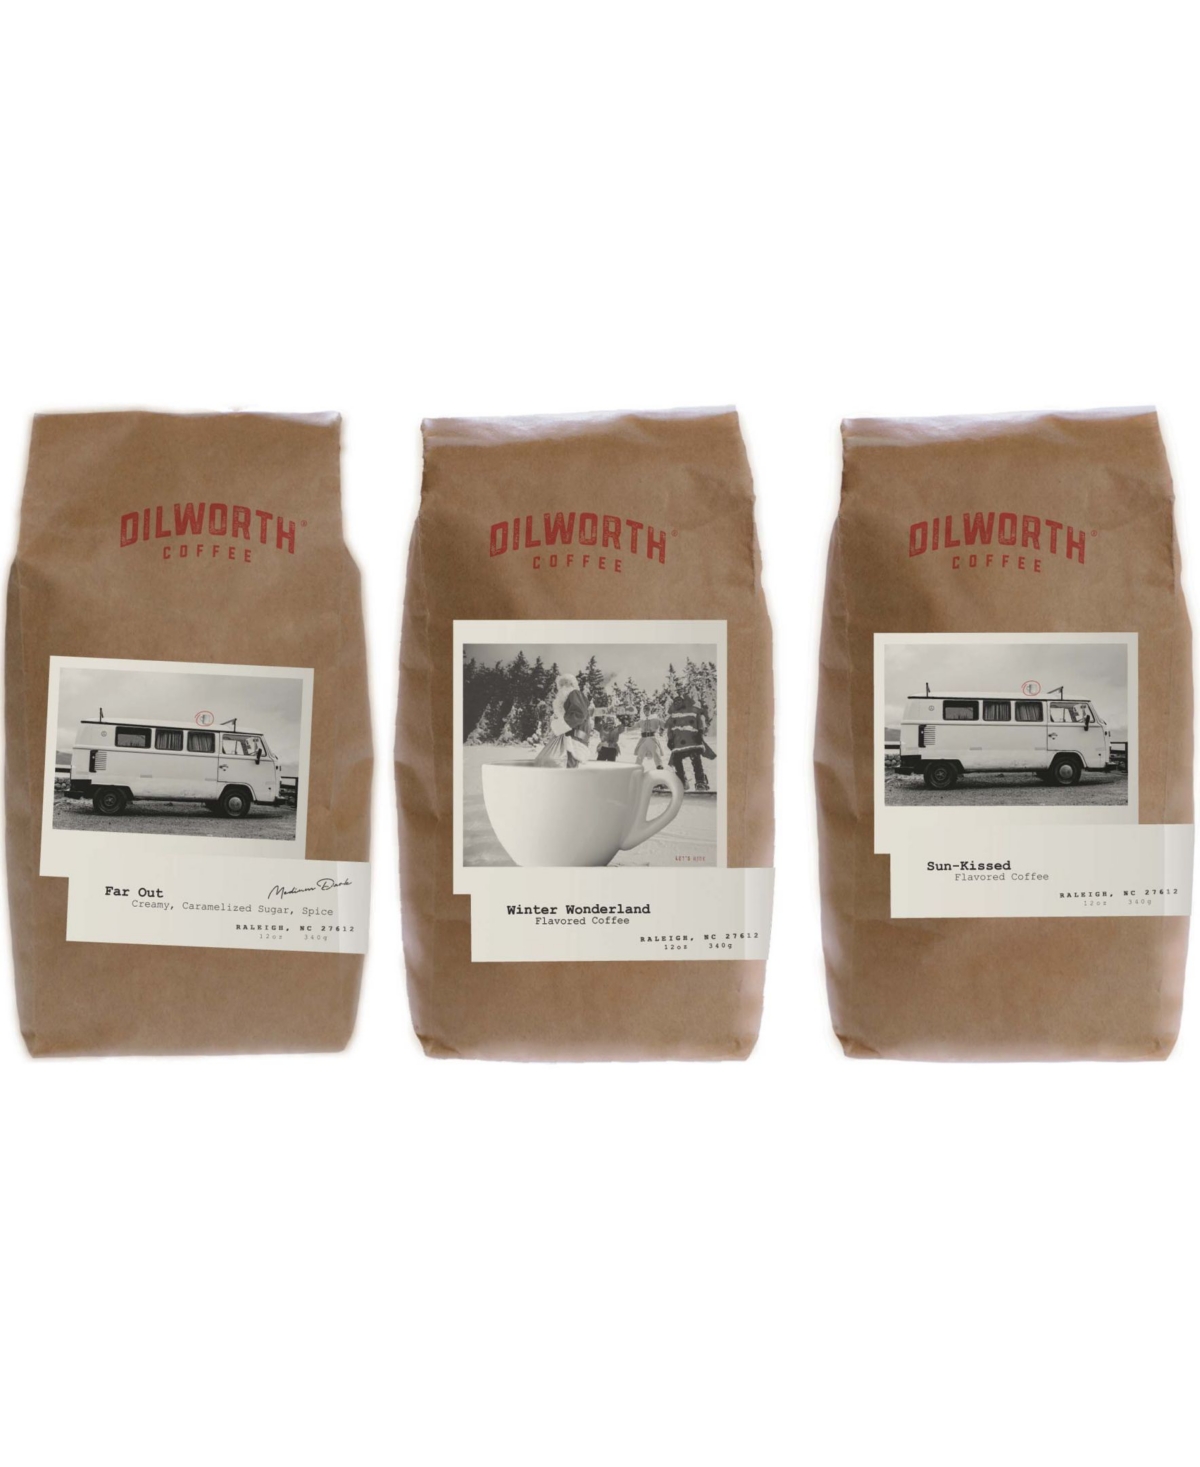 Dilworth Coffee Ground Coffee, Holiday Flavored Variety Coffee Bundle, 36 Ounces Pack